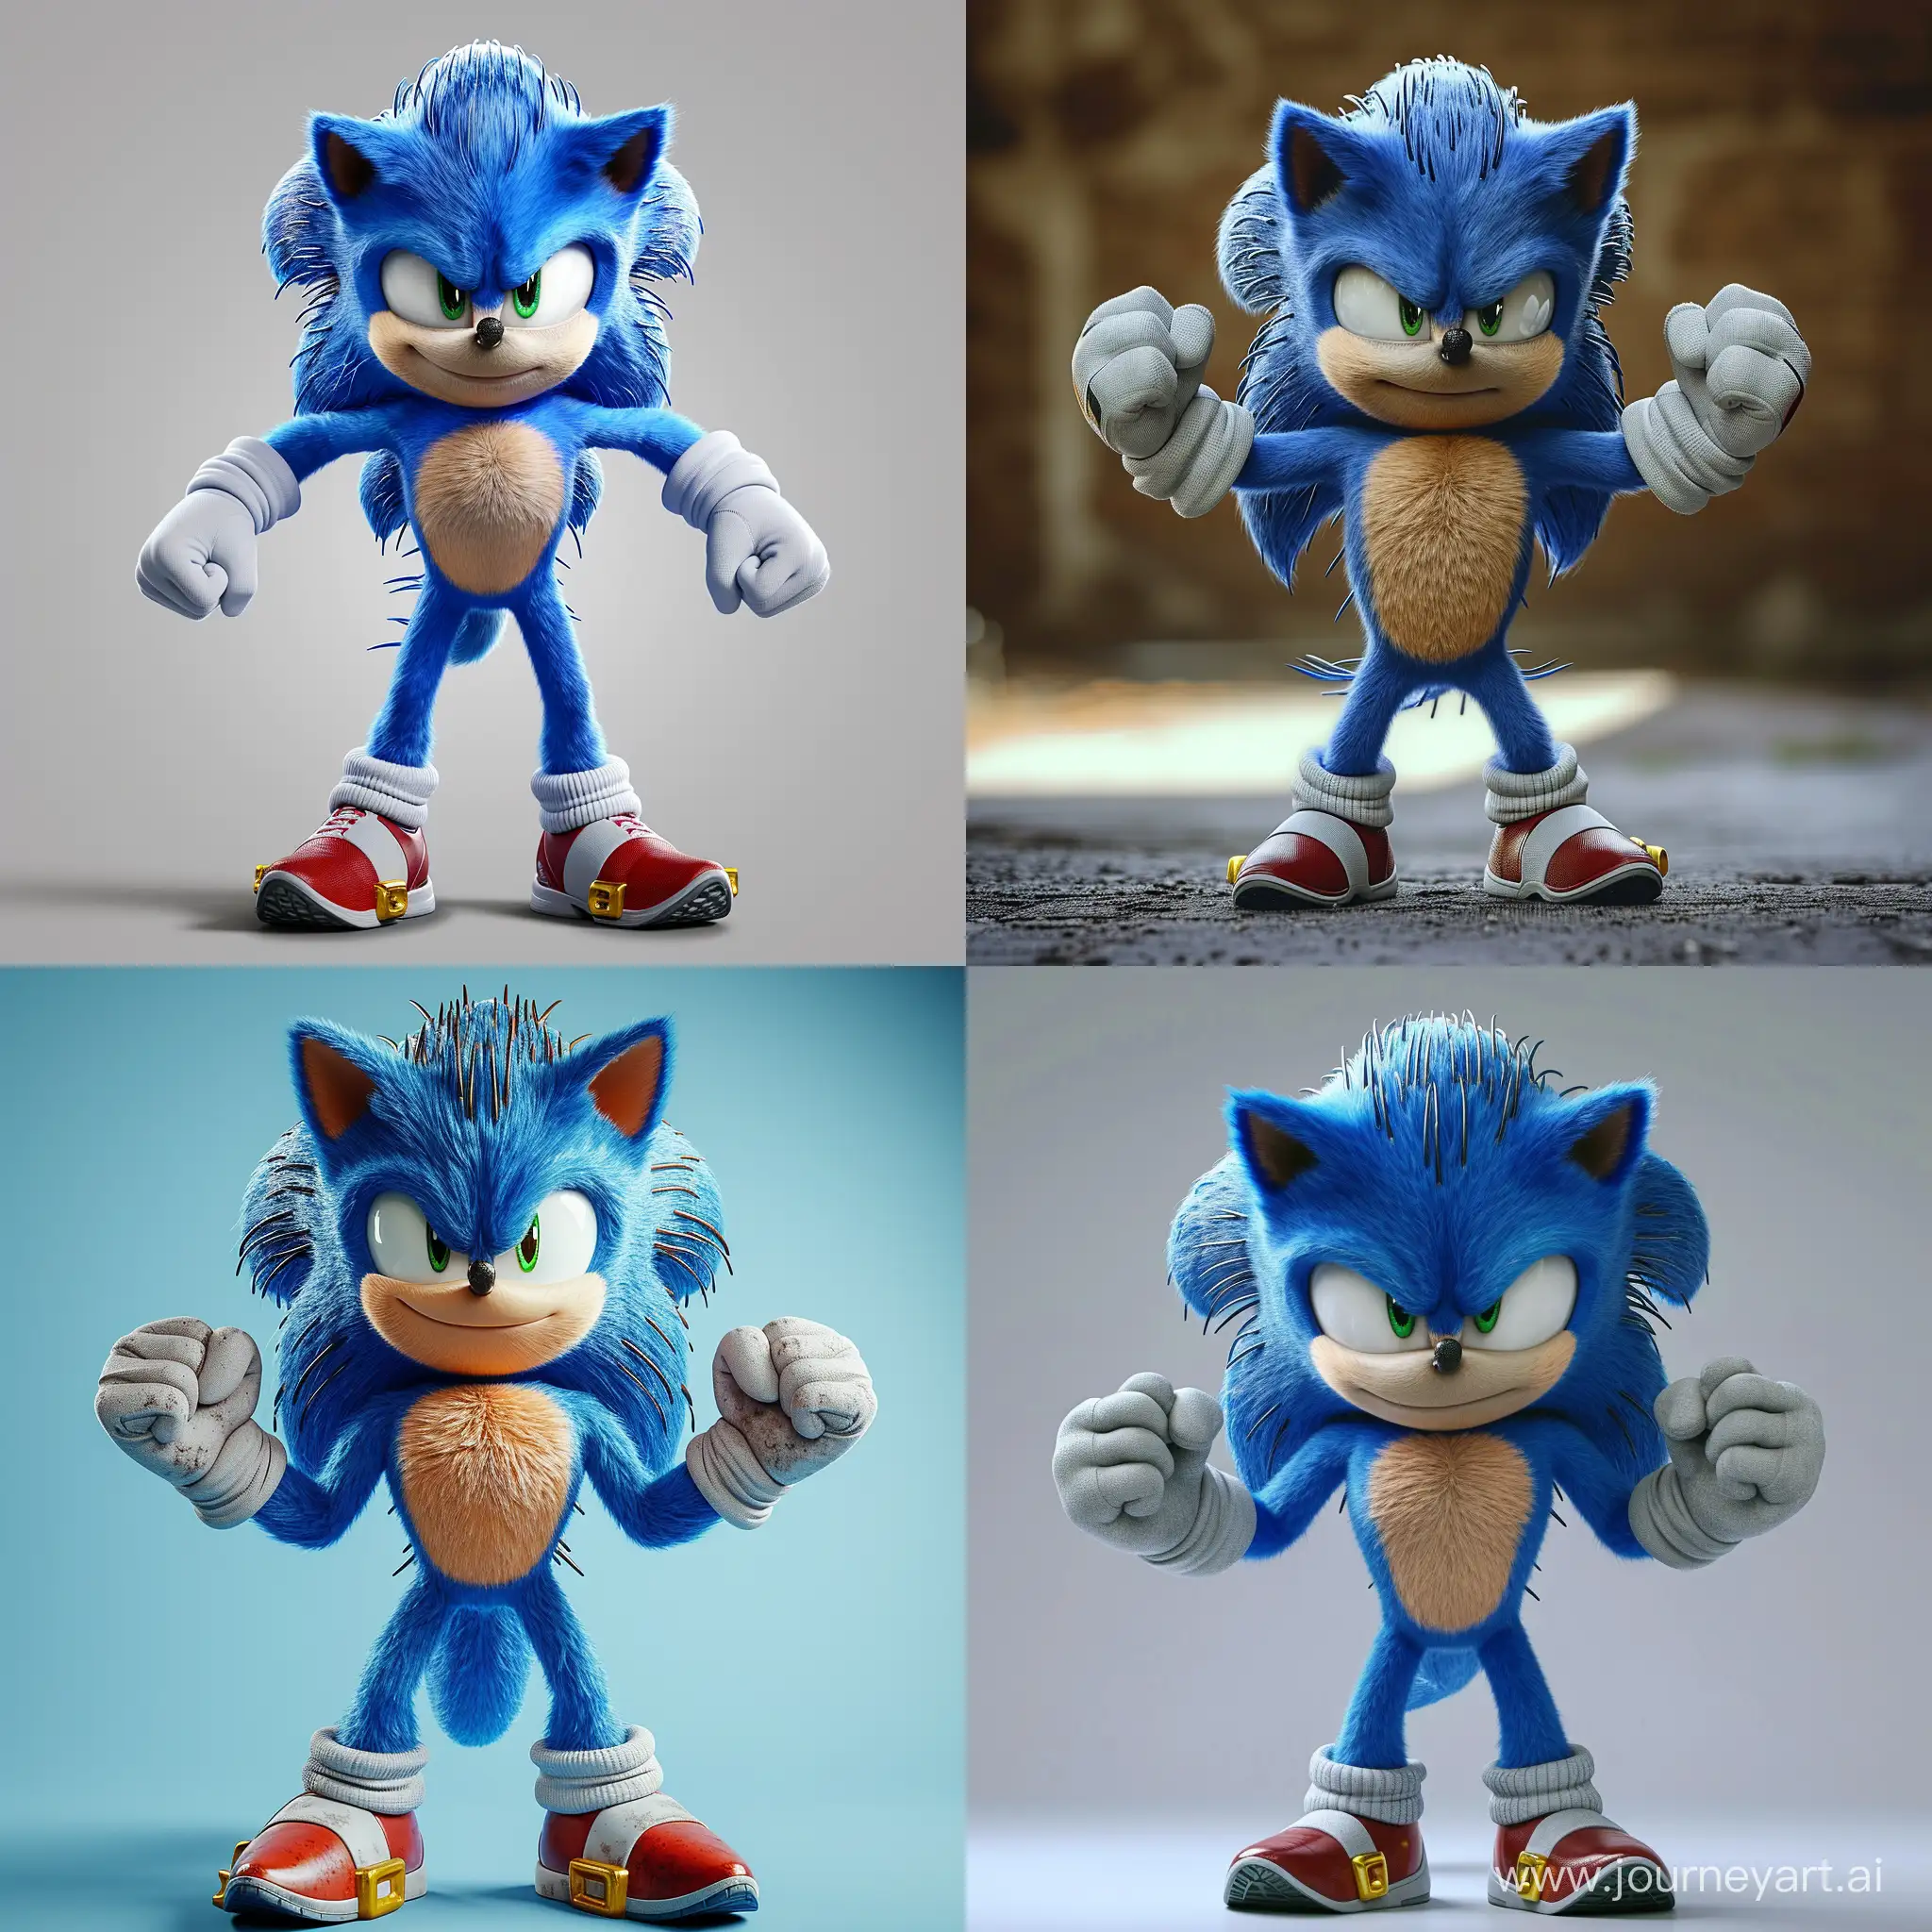 Sonic-Hedgehog-Transformation-Sculpted-Abs-and-Powerful-Physique